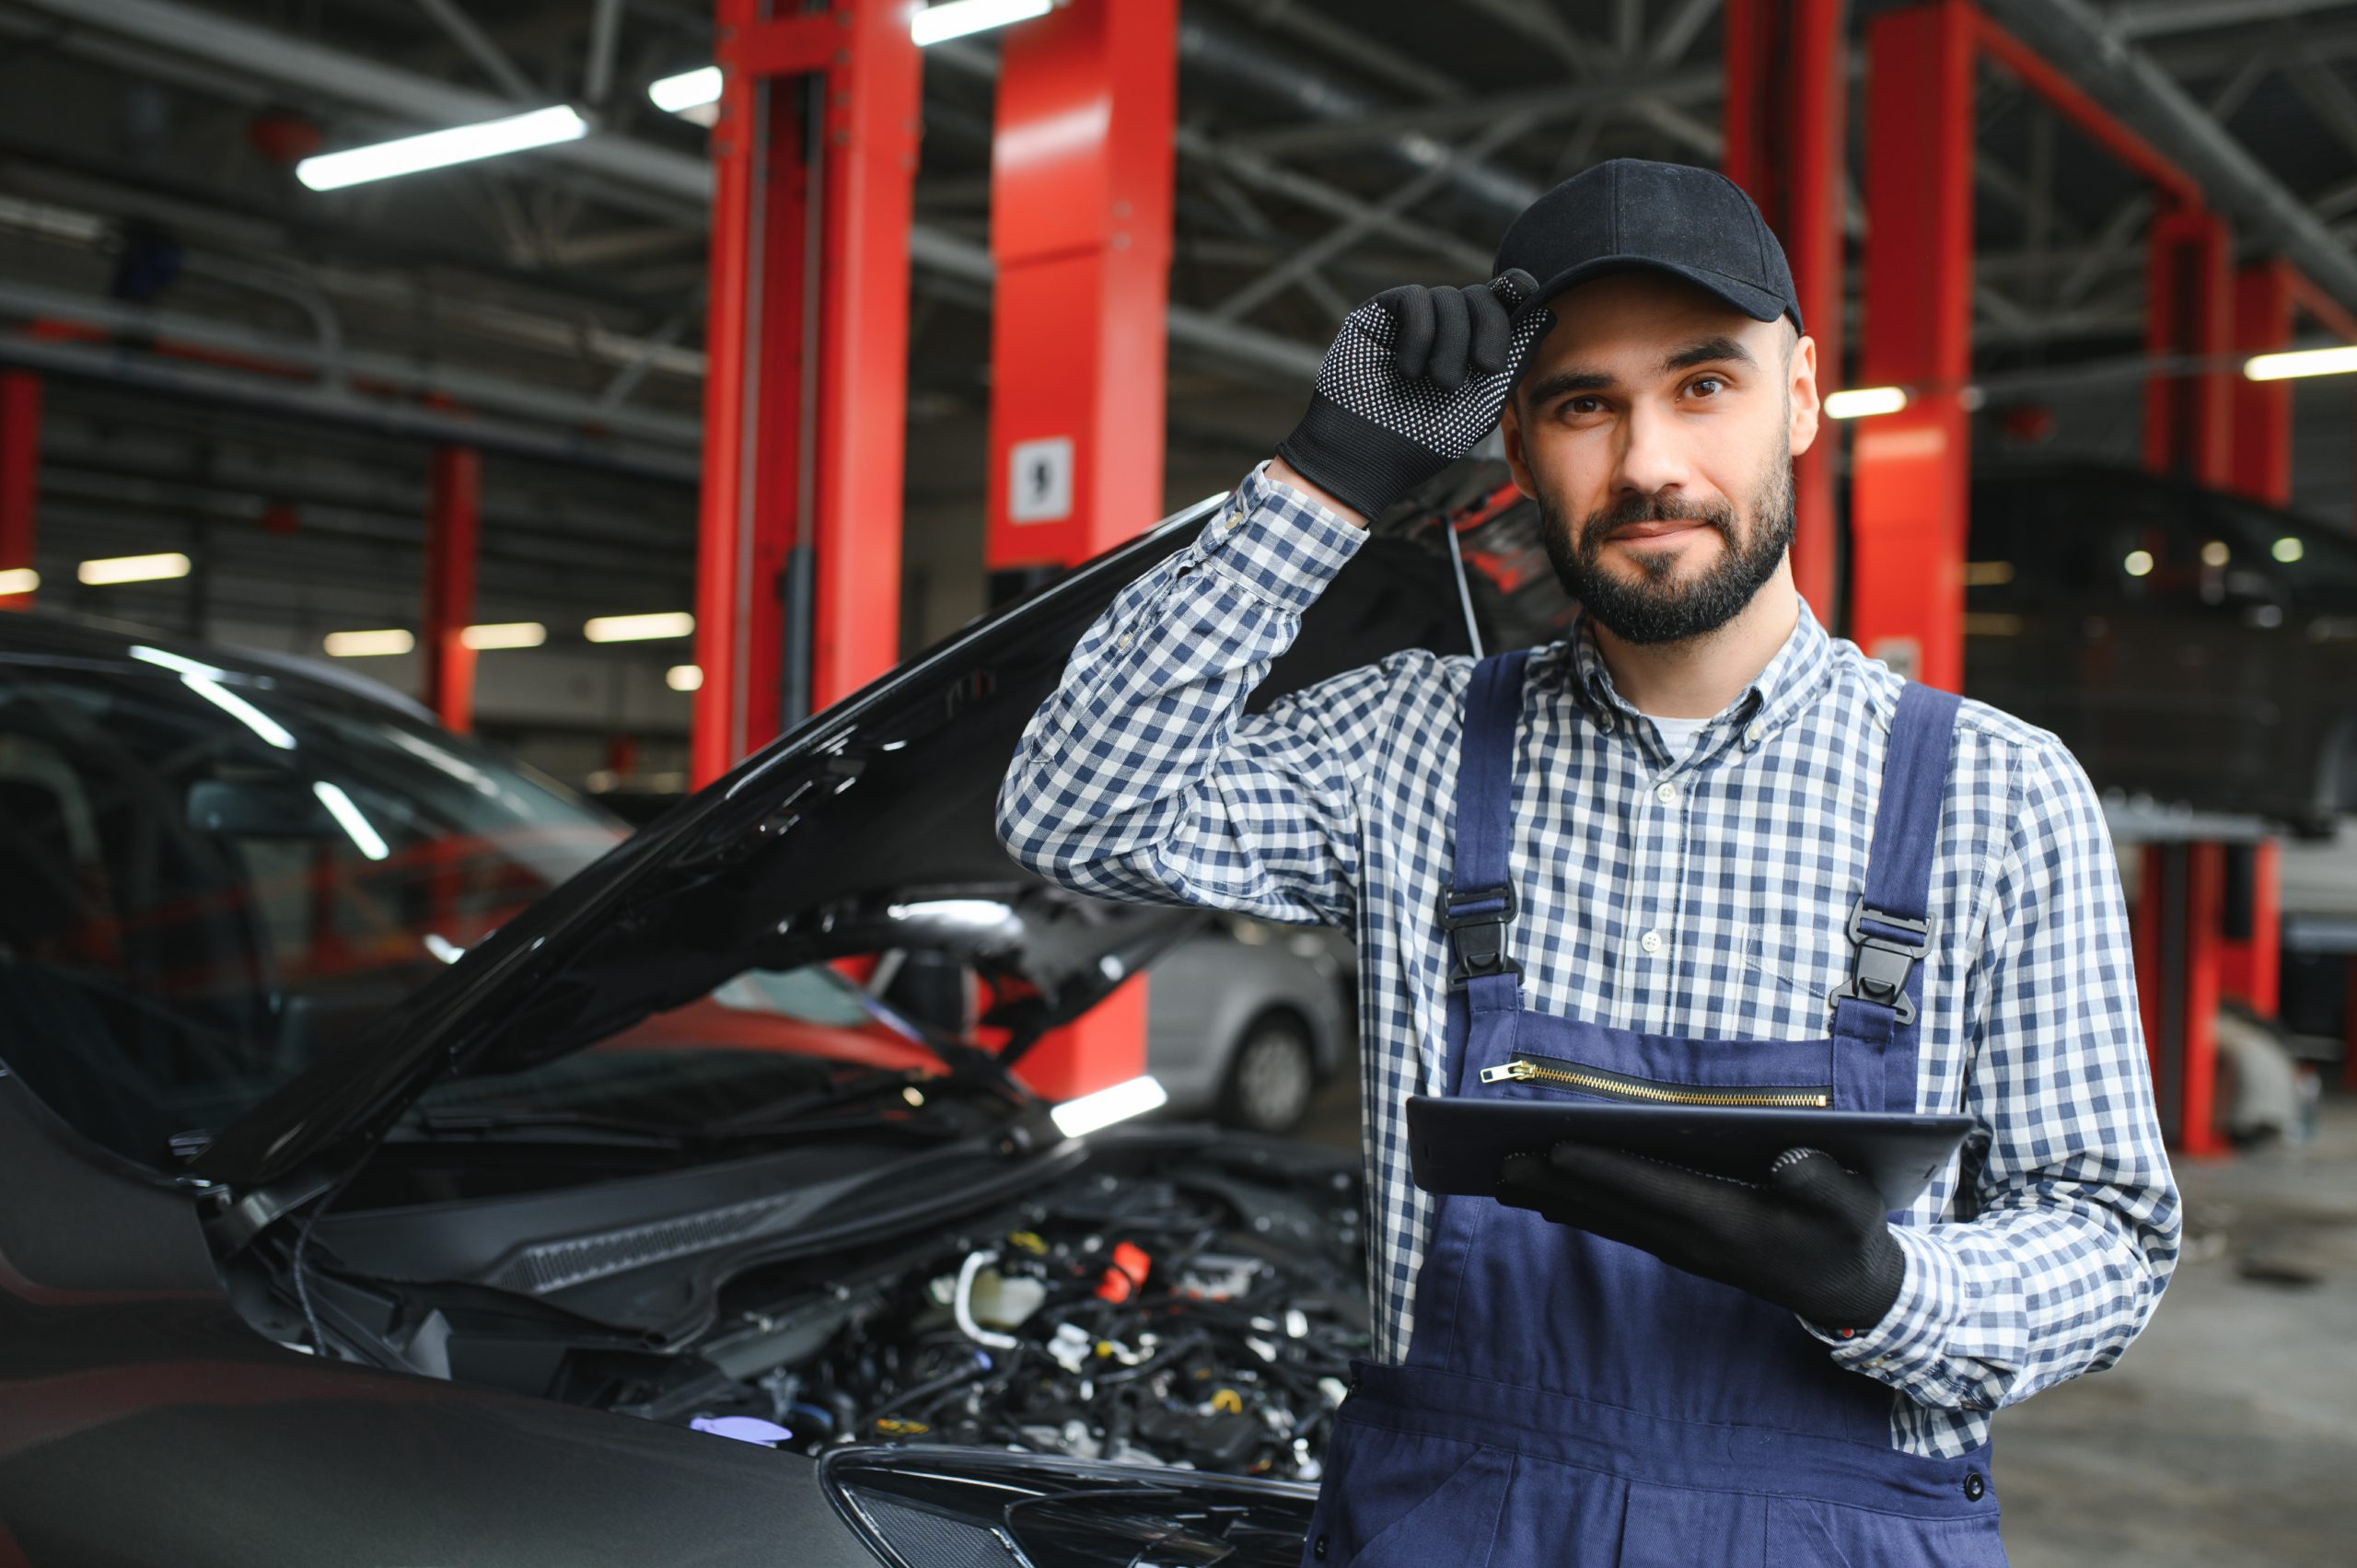 https://autolab.com.co/wp-content/uploads/smiling-mechanic-using-a-tablet-pc-at-the-repair-g-2023-12-18-21-25-17-utc-scaled.jpg